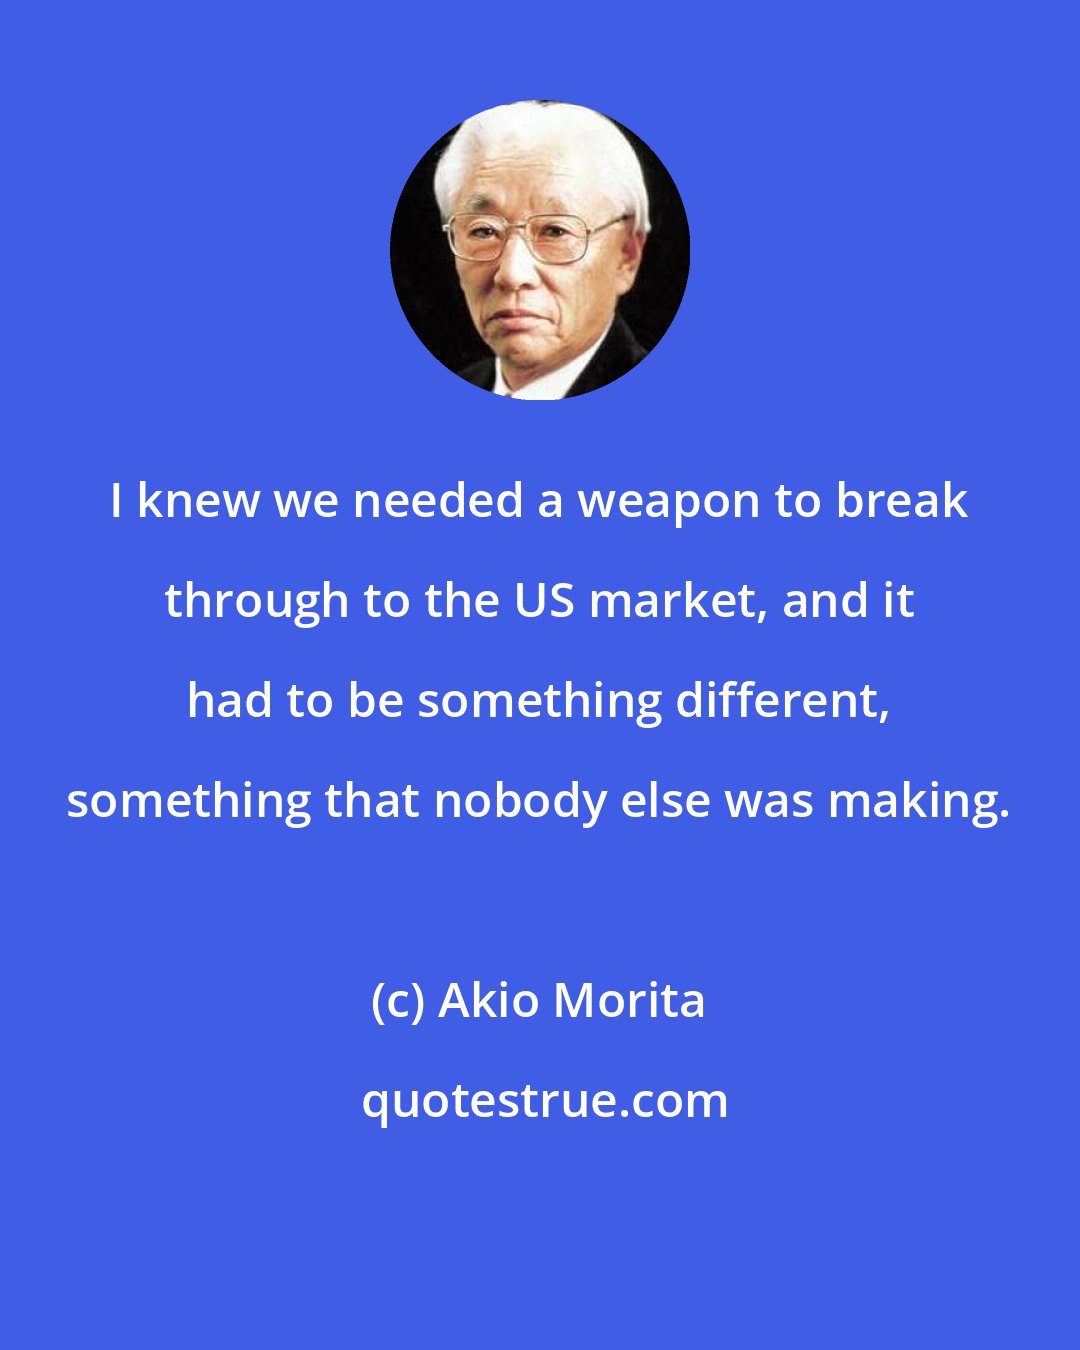 Akio Morita: I knew we needed a weapon to break through to the US market, and it had to be something different, something that nobody else was making.